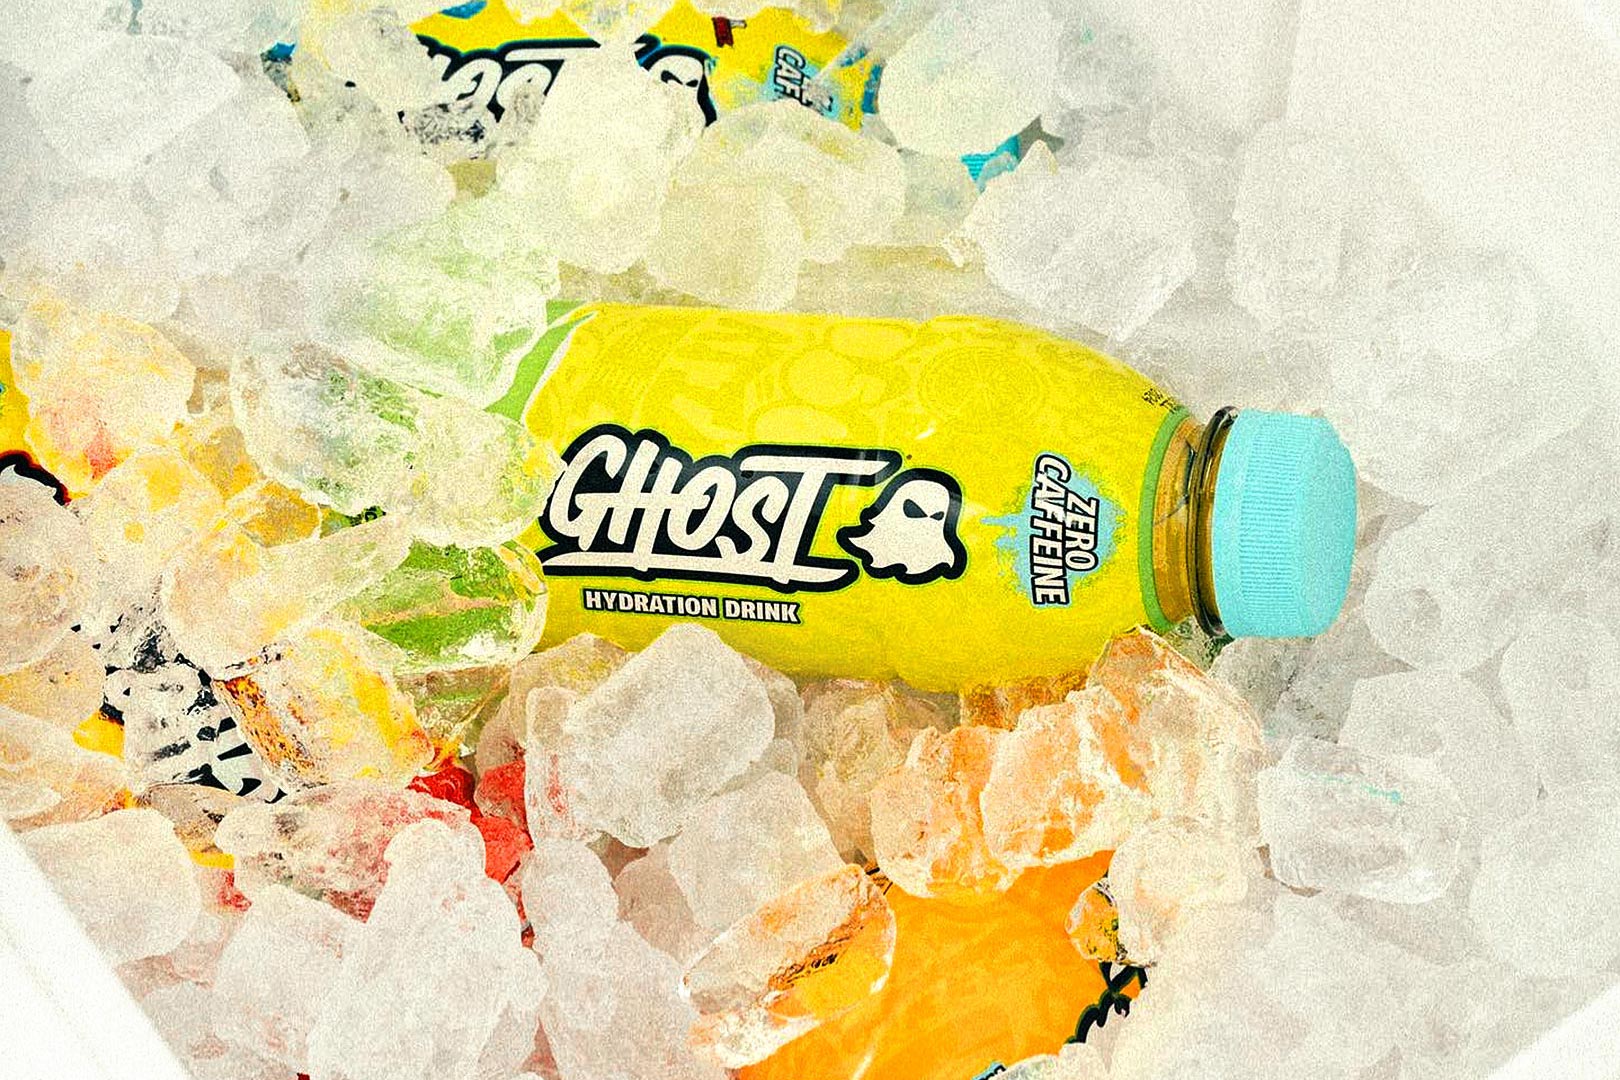 Be one of the first to get your hands on the Ghost Hydration Drink